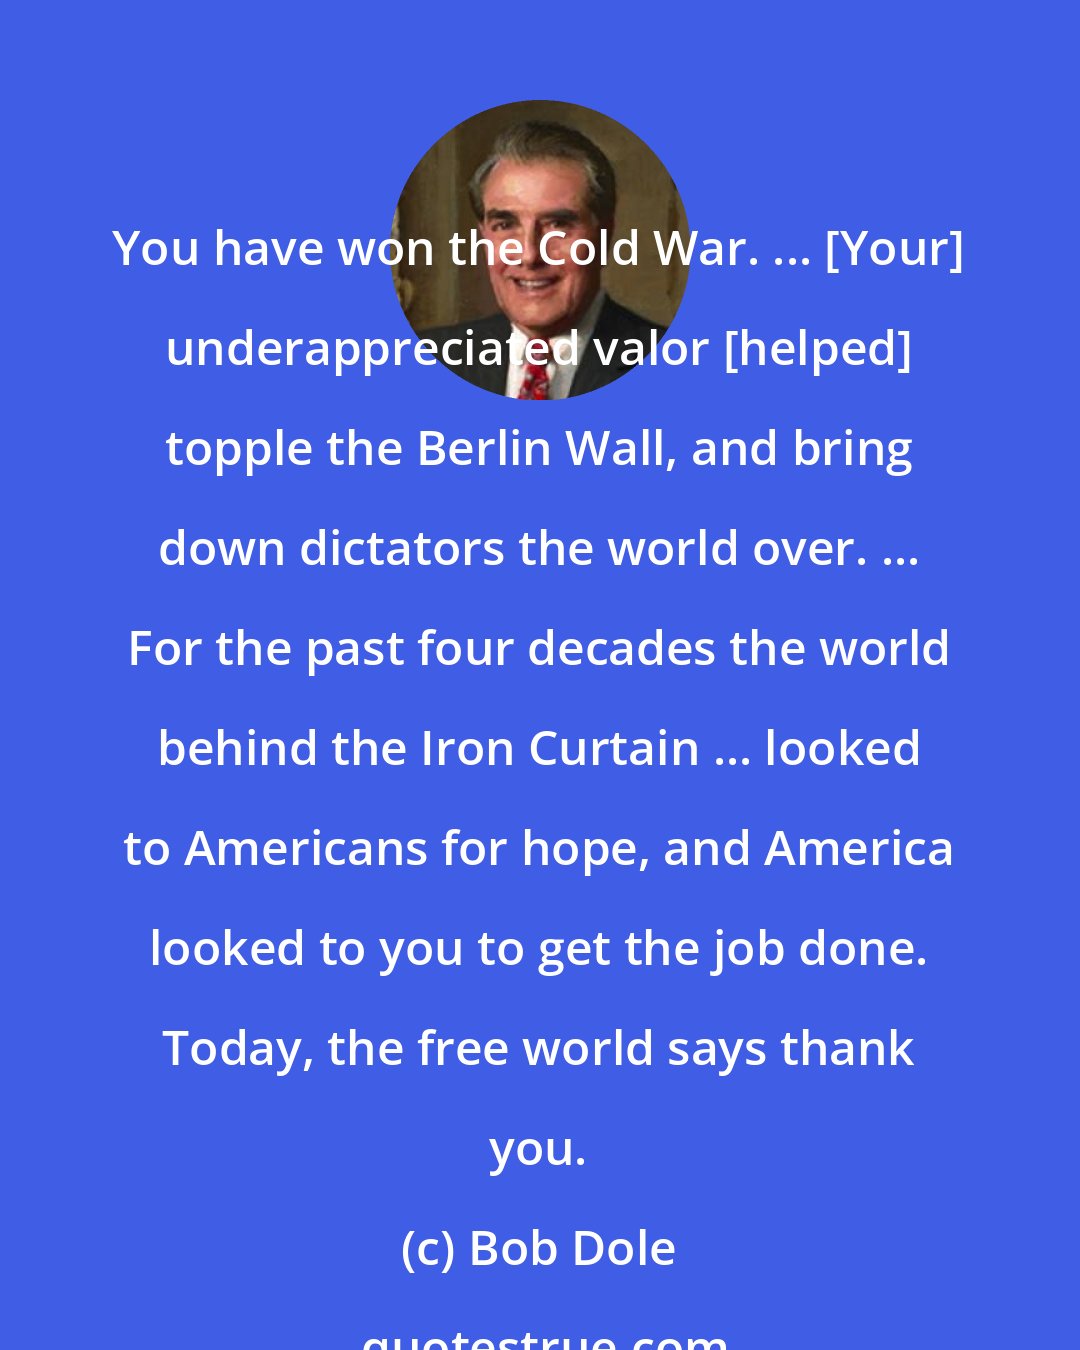 Bob Dole: You have won the Cold War. ... [Your] underappreciated valor [helped] topple the Berlin Wall, and bring down dictators the world over. ... For the past four decades the world behind the Iron Curtain ... looked to Americans for hope, and America looked to you to get the job done. Today, the free world says thank you.